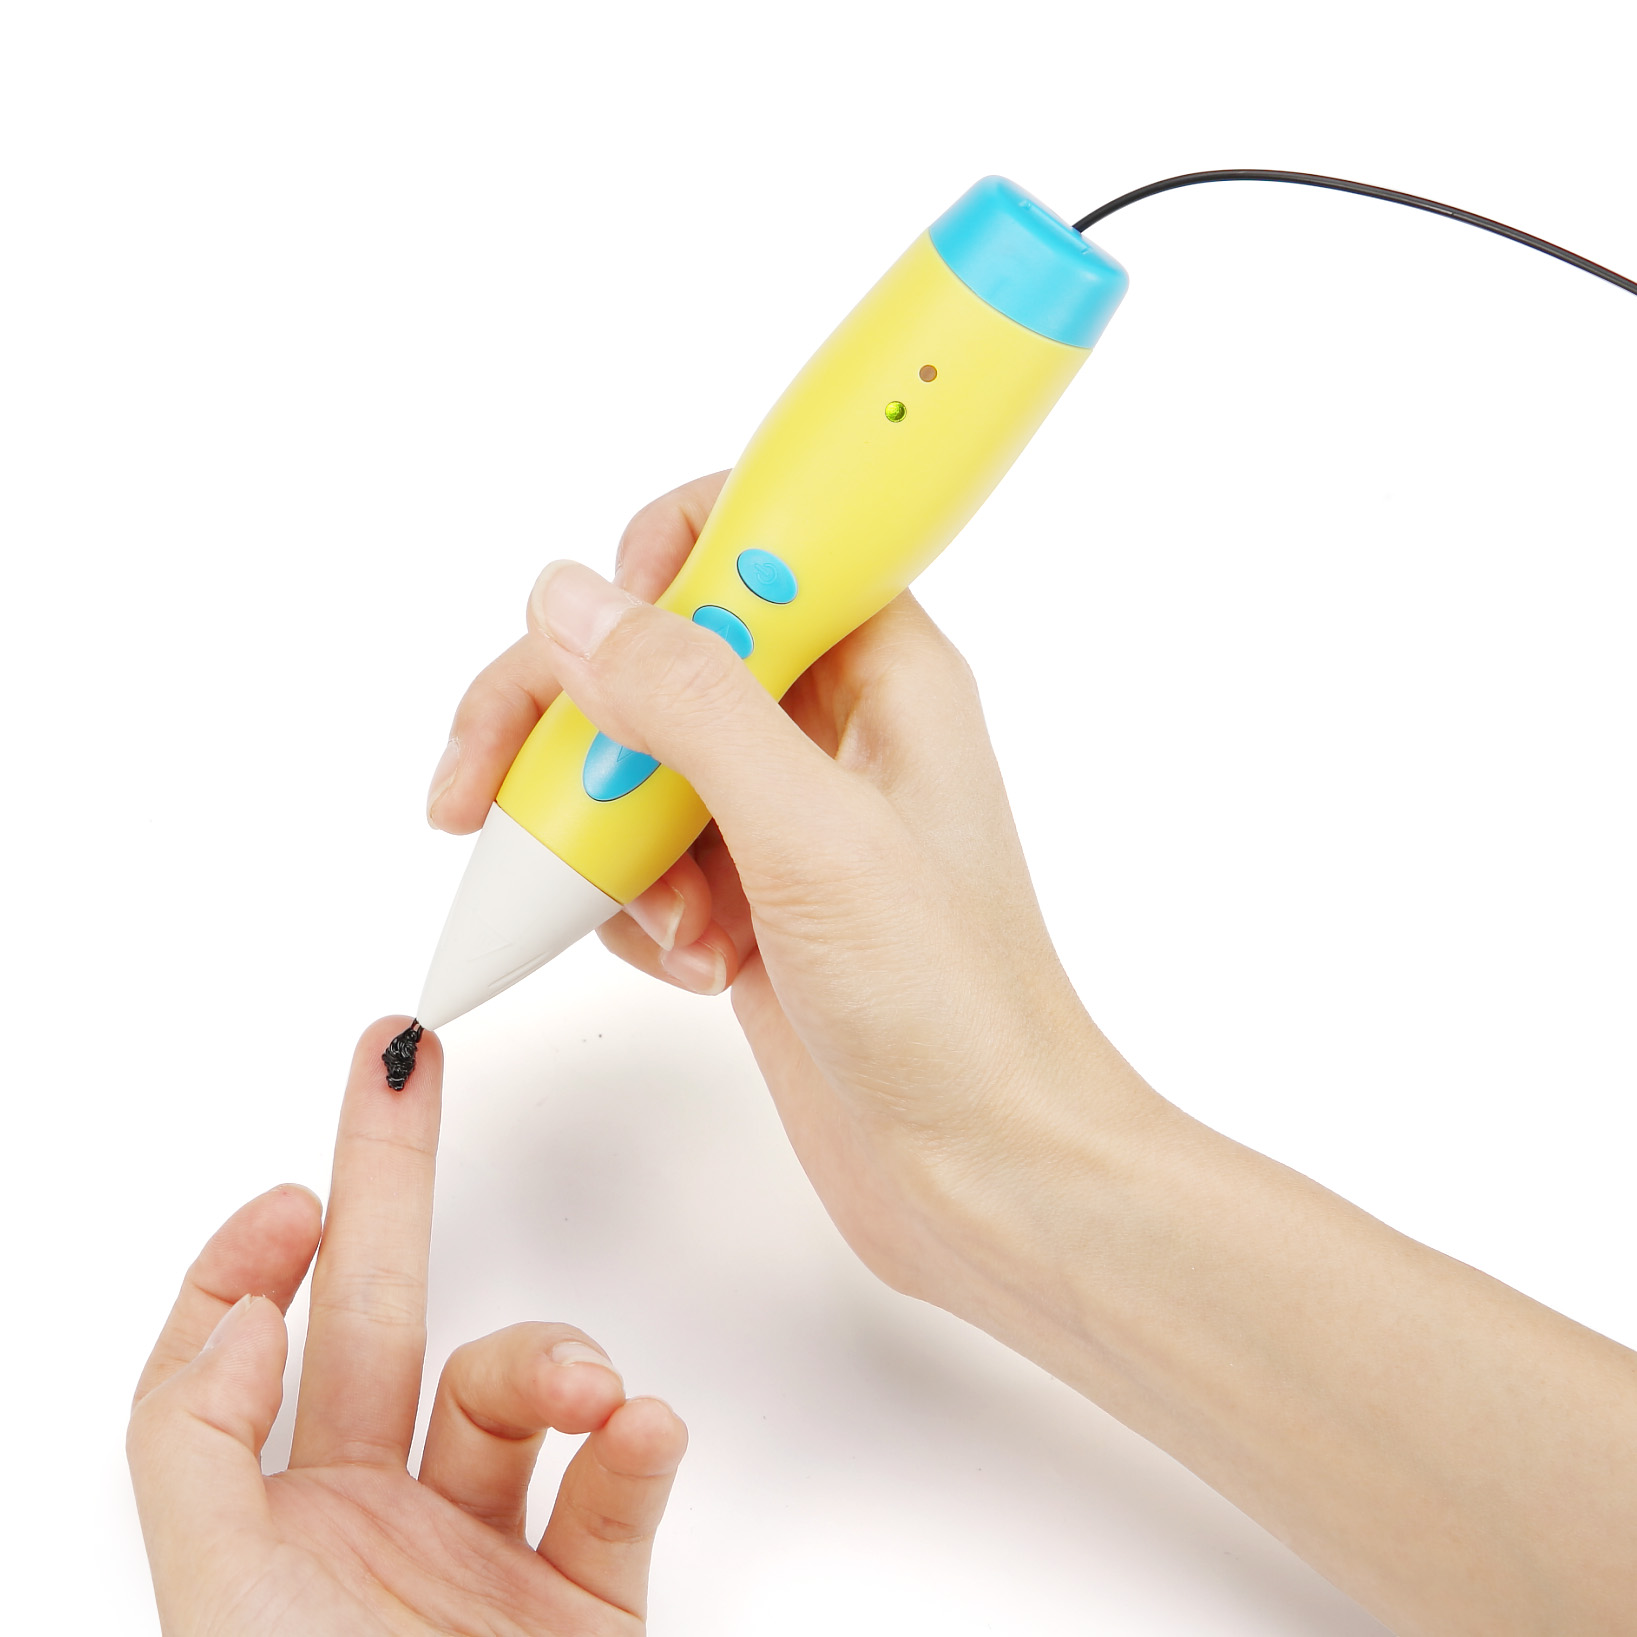 3D Pen for children | Works with lower temperatures